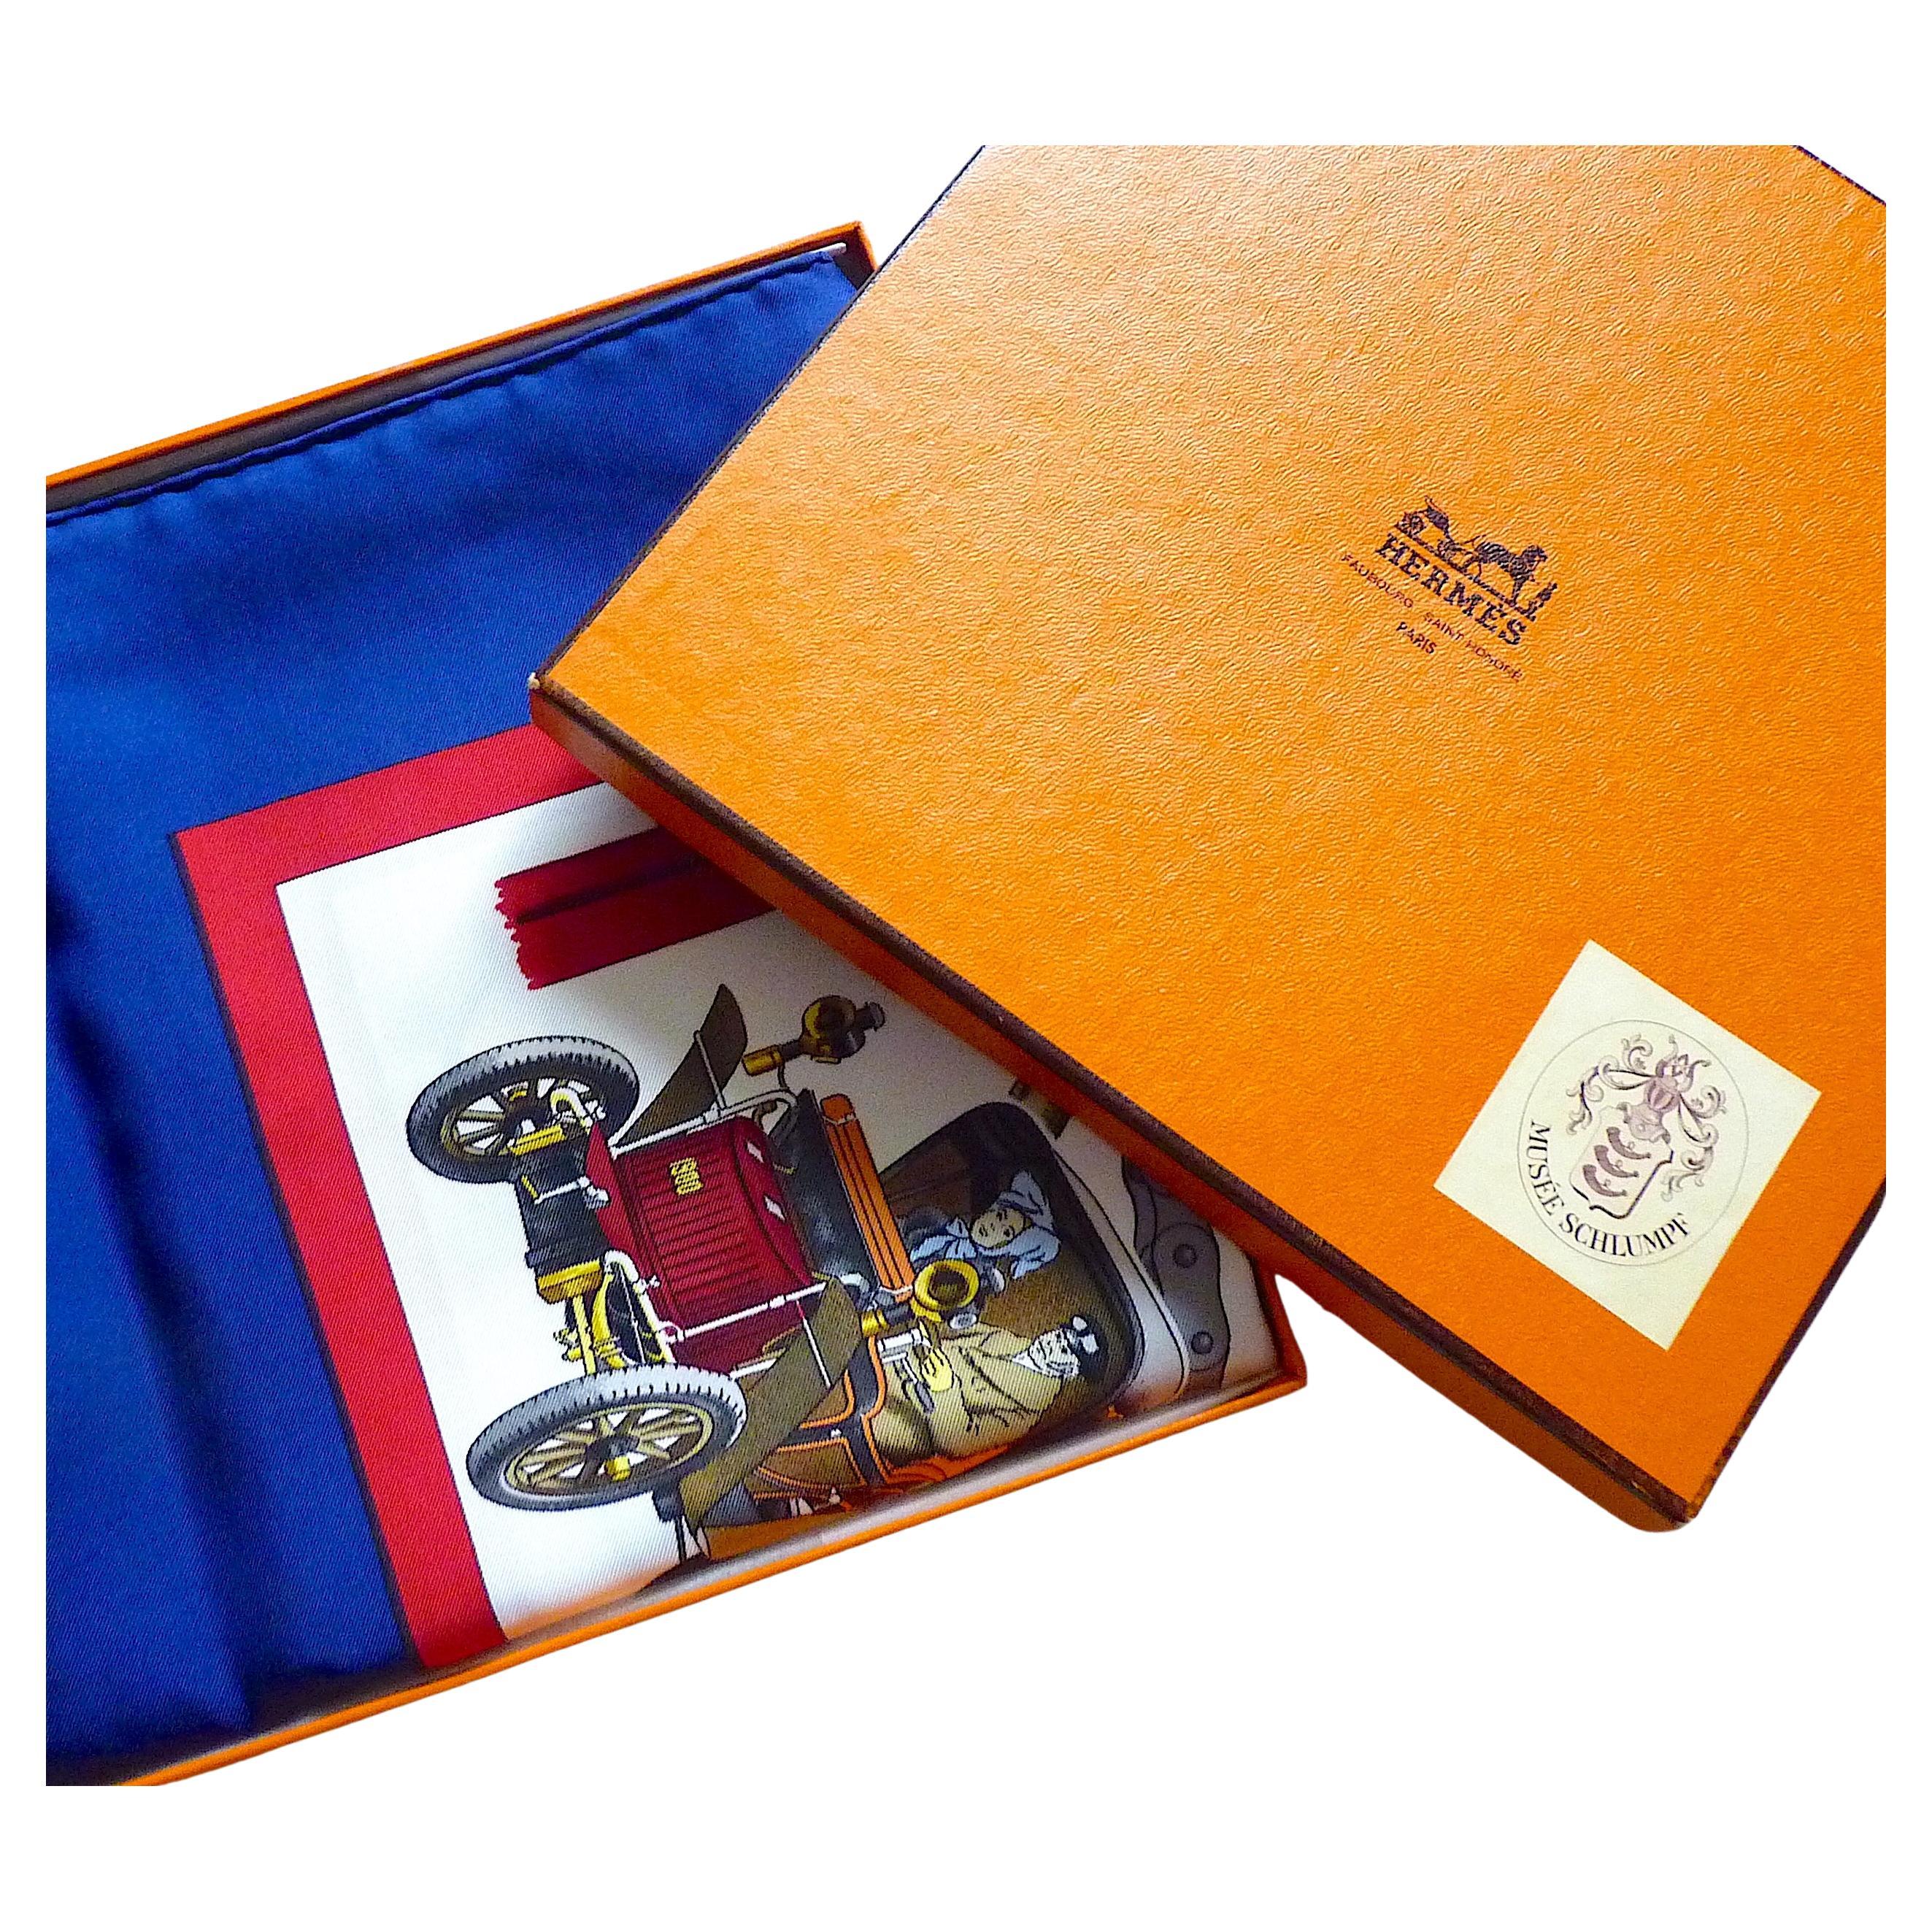 Hermes Scarf Teuf Teuf Special Edition for Musée Schlumpf in 1971 by Ledoux For Sale